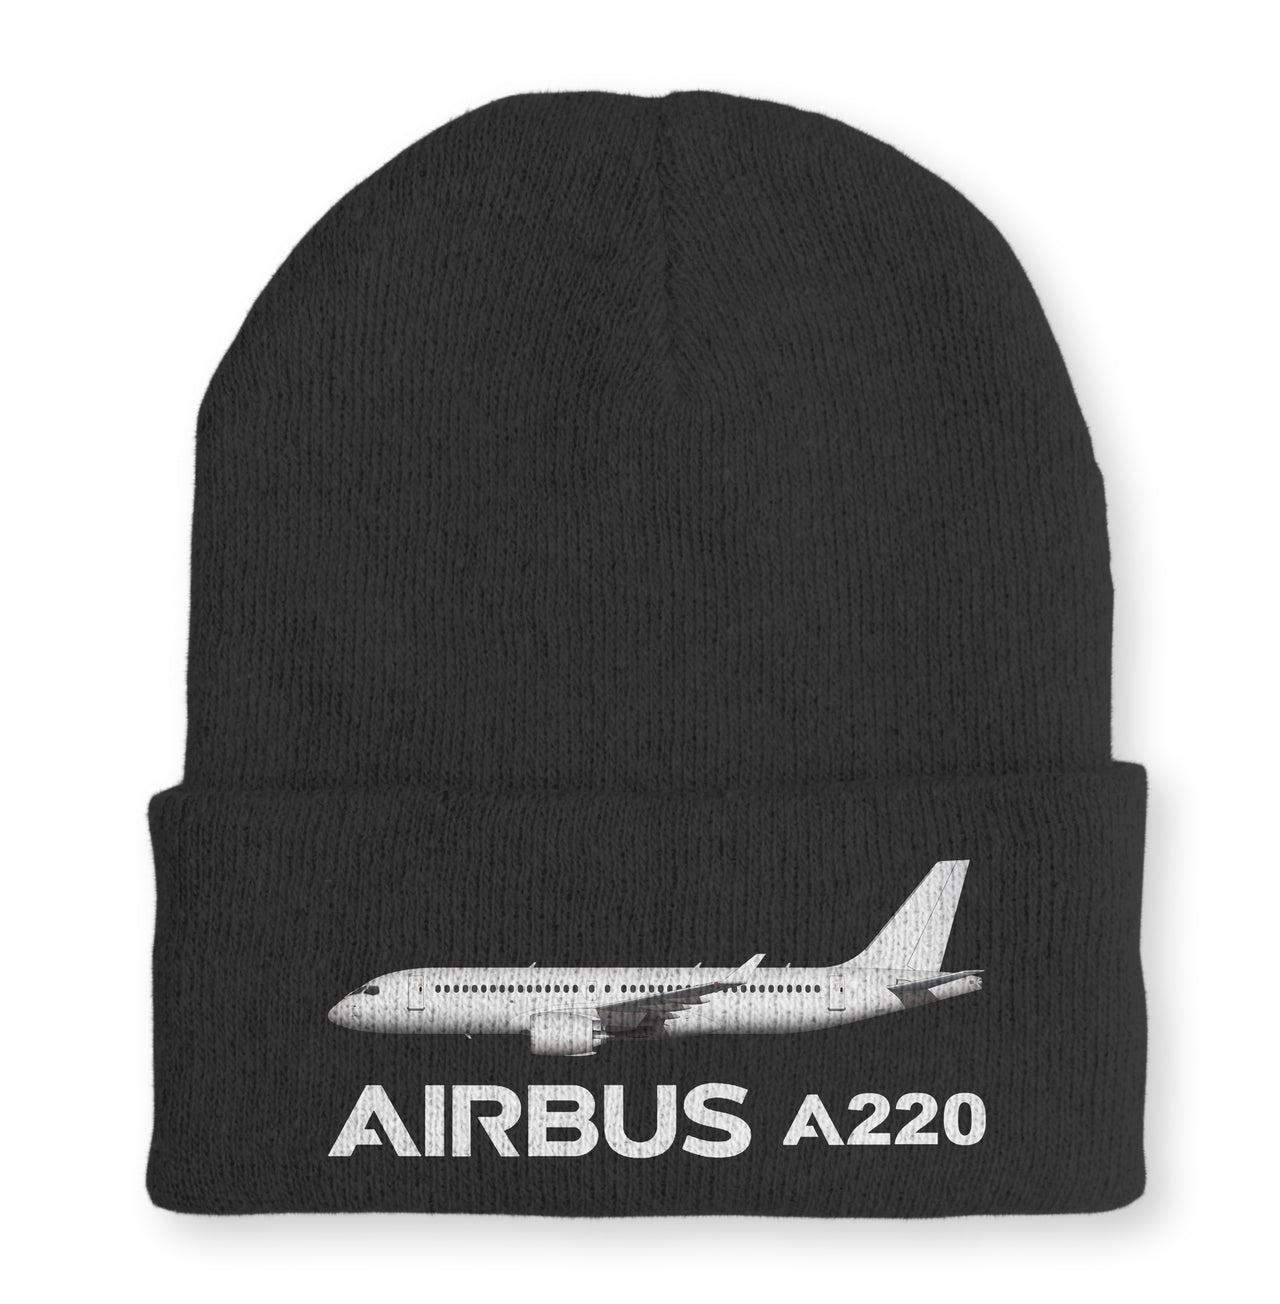 The Airbus A220 Embroidered Beanies